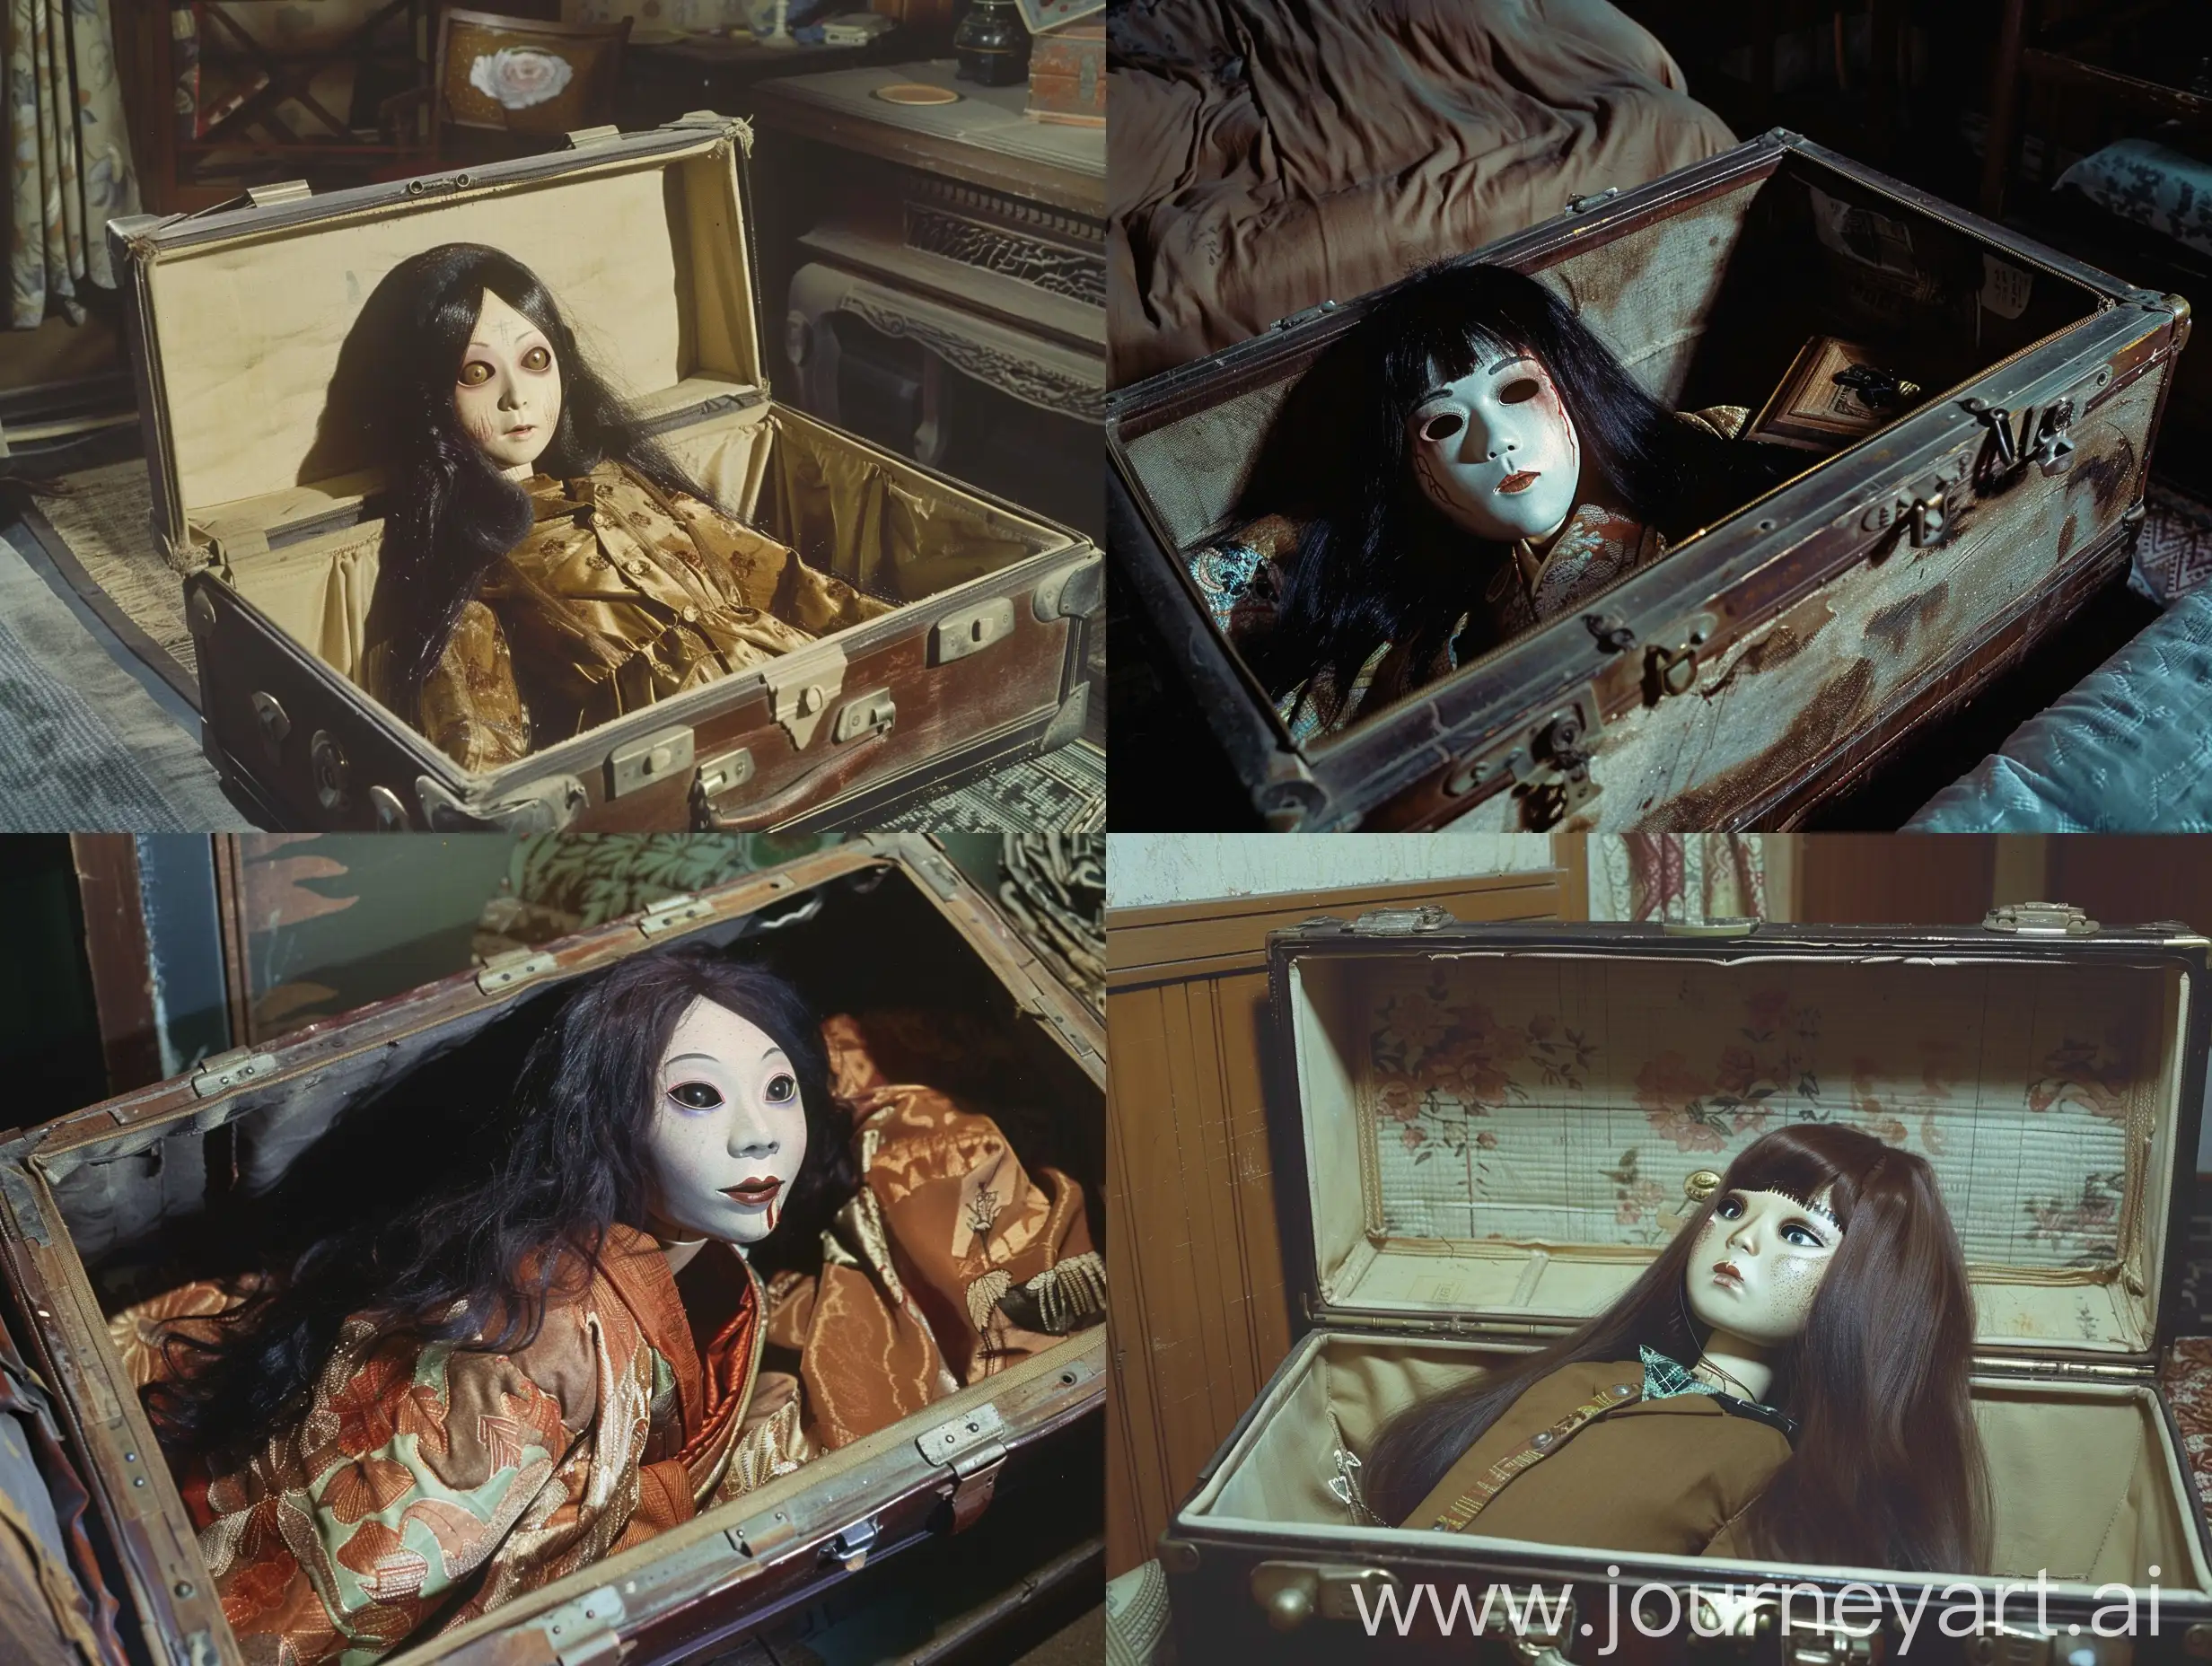 Cinematic panorama of the horror movie of japan in the late night, a yokai, Woman puppet in suitcase, She is characterized by a puppet analyzed as accessories placed inside an open suitcase, she has a beautiful face (emphasis on the texture of human skin on the face), long hair, gorgeous and fashionable clothing, and helpless eyes. Japanese 1970, In the room of old hotel, unsettling, curse